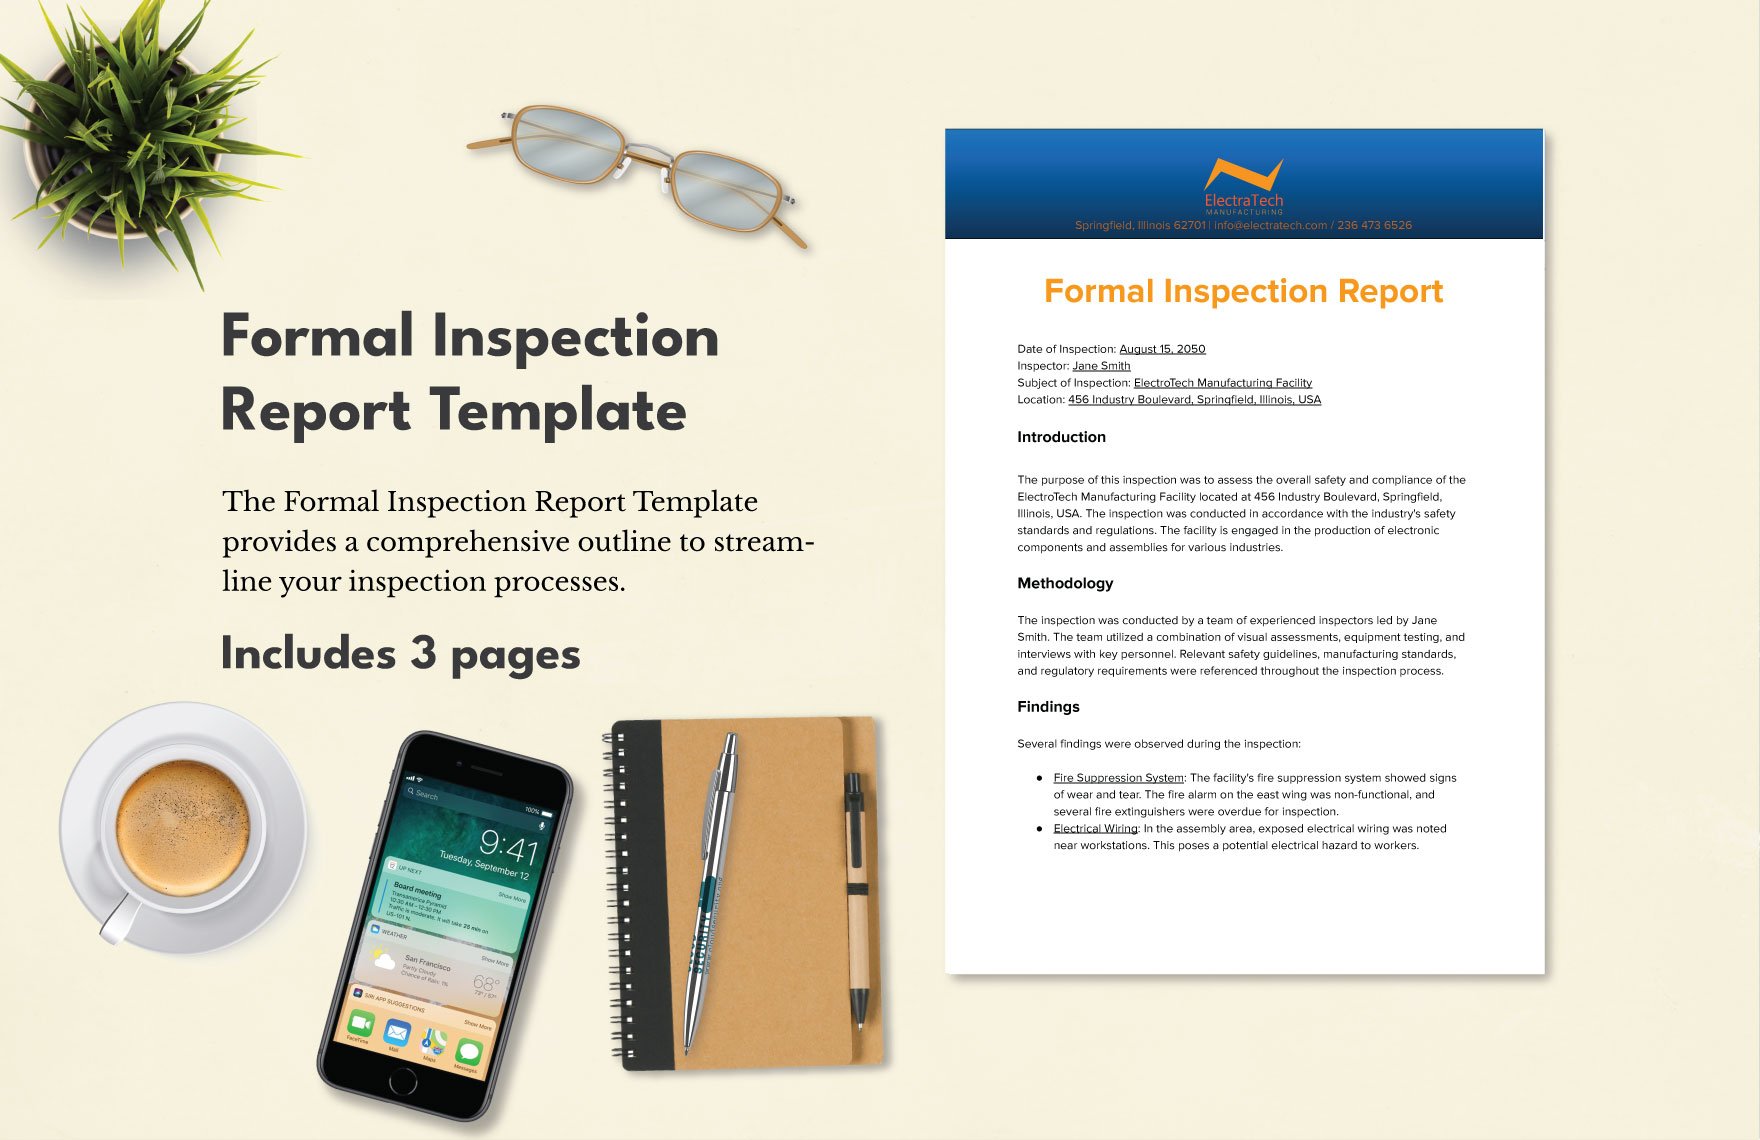 Formal Inspection Report Template in Word, Google Docs, PDF